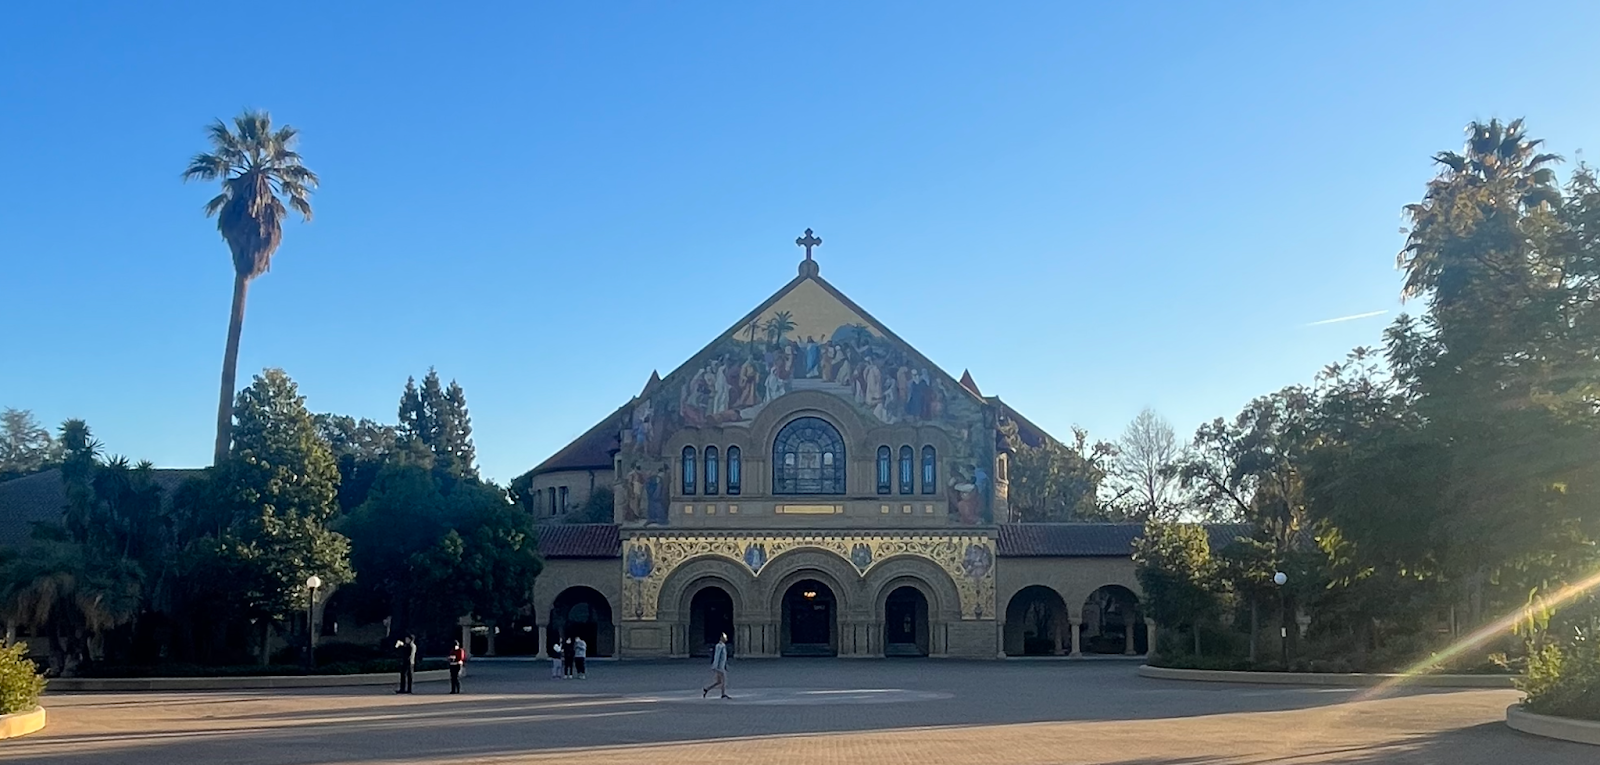 Stanford’s Search for Meaning